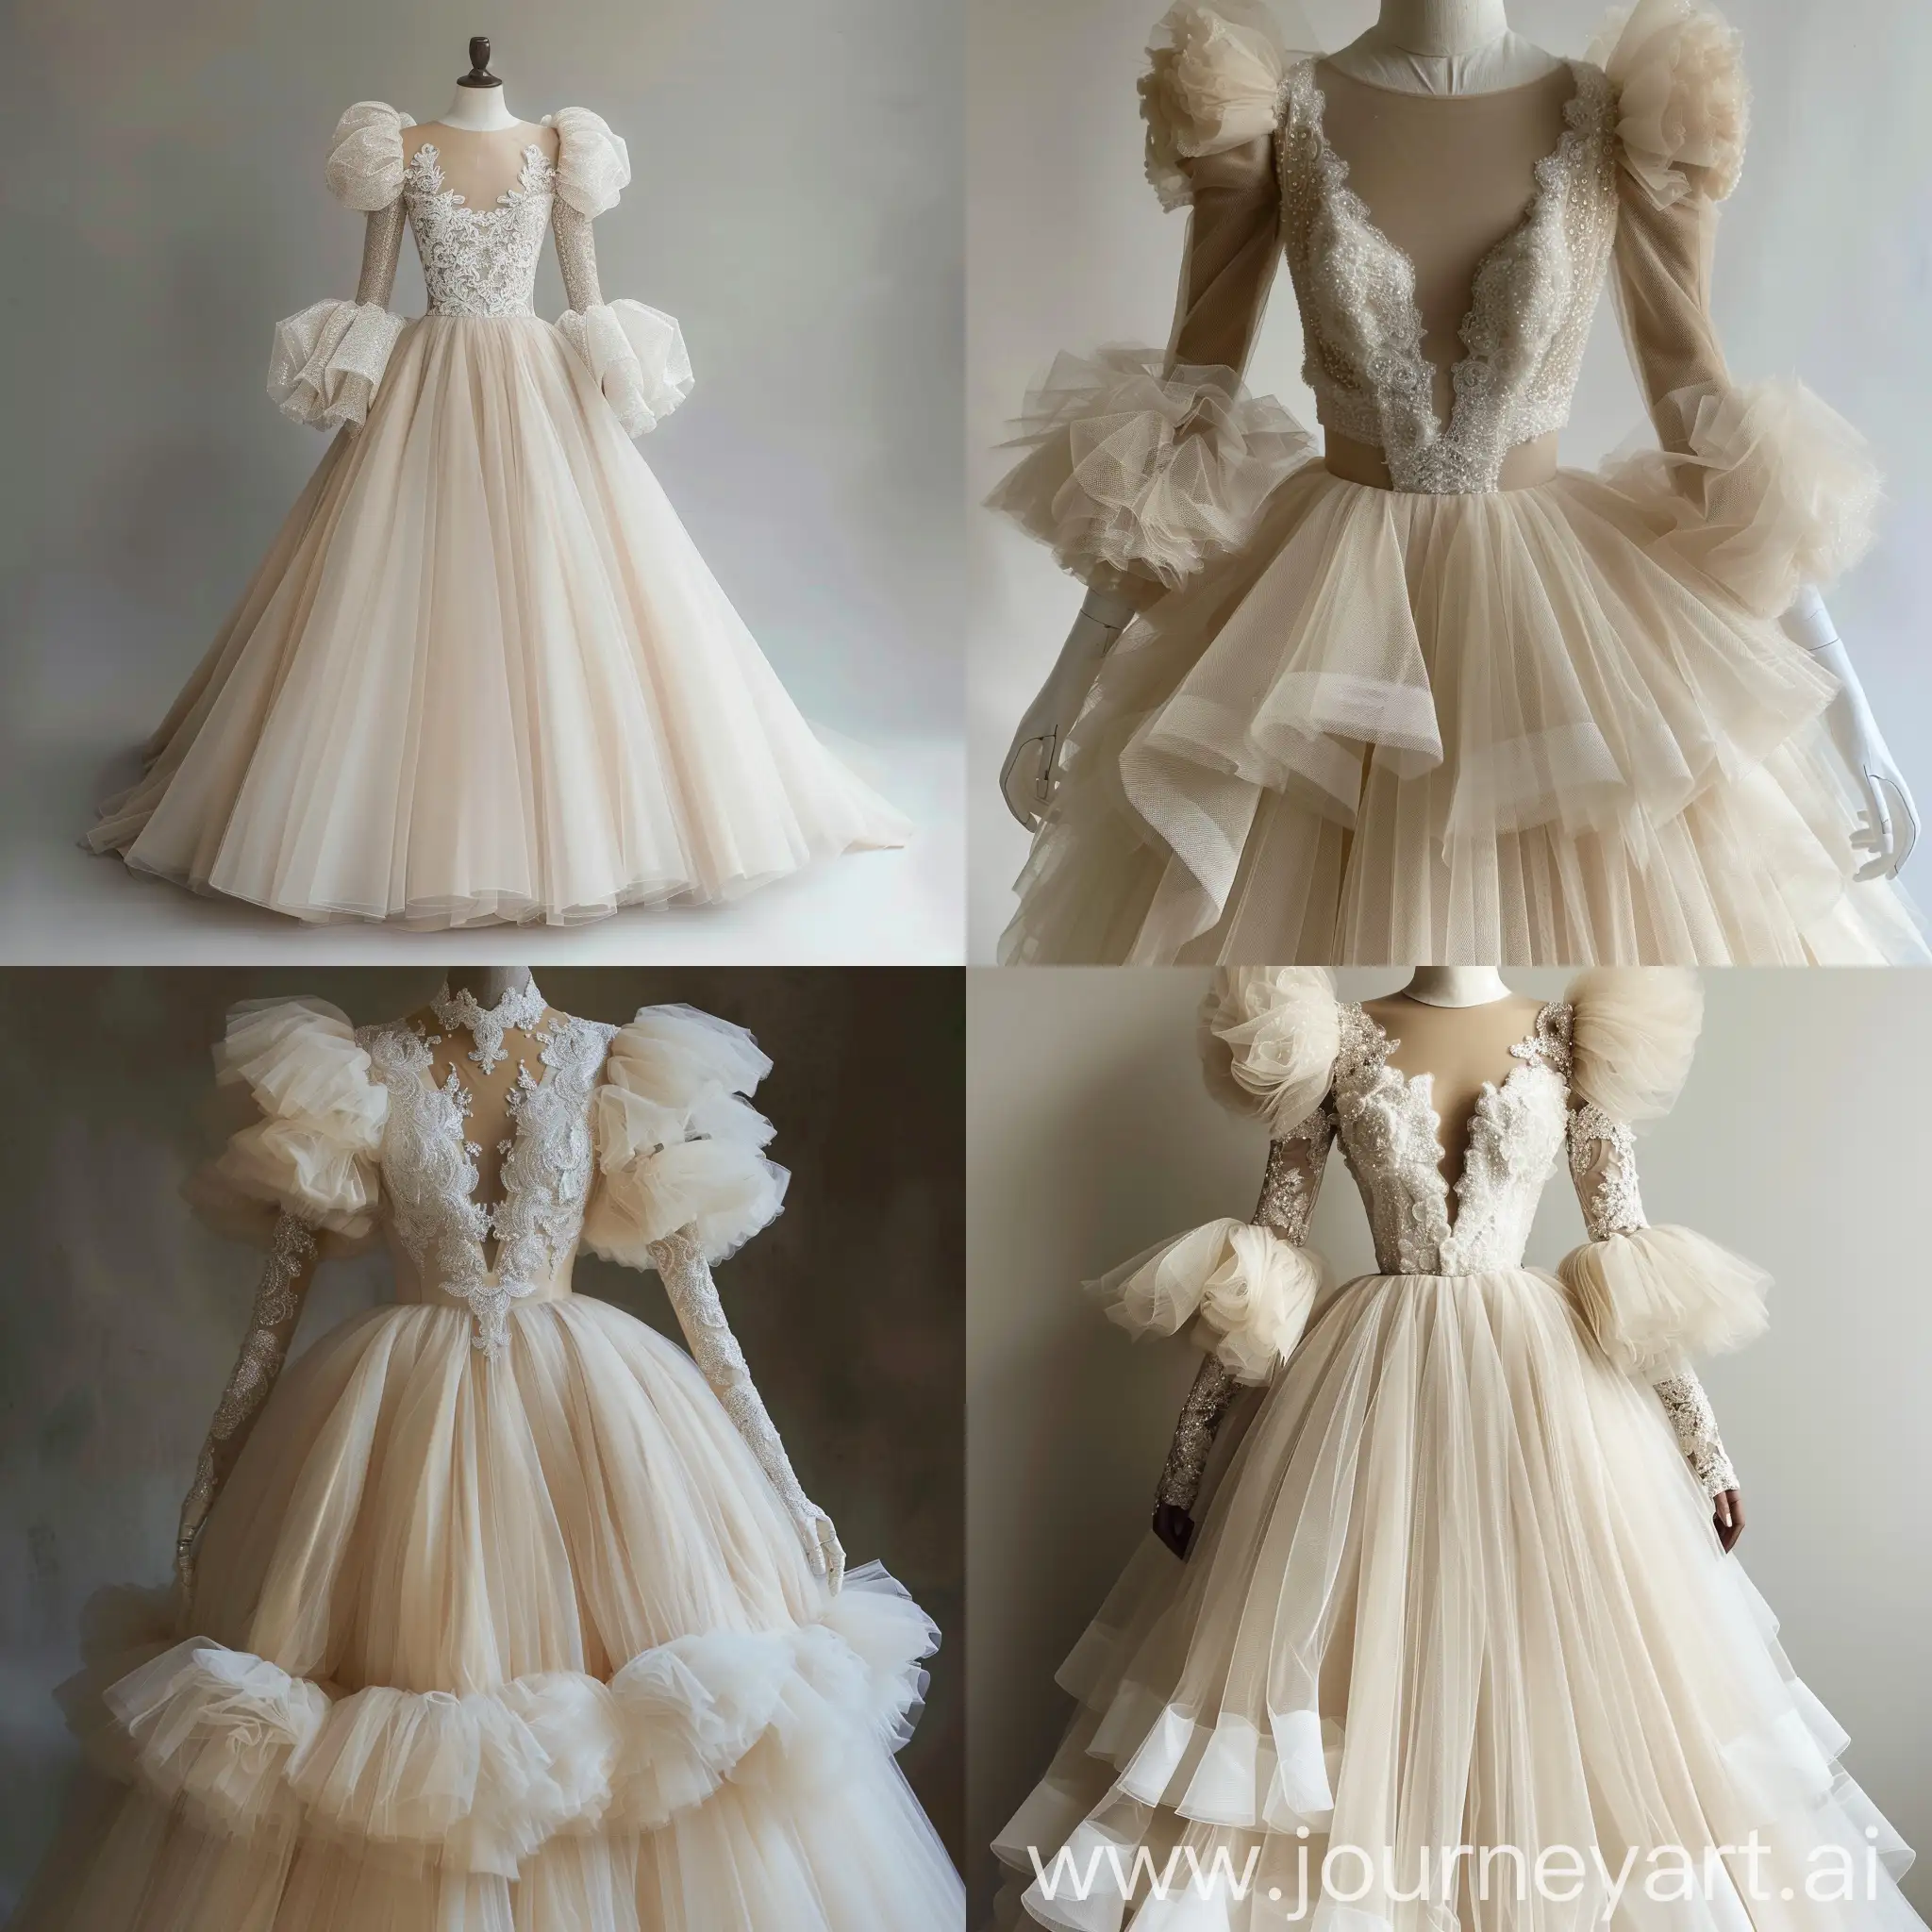 imagine a floor length light beige tulle wedding dress, with a fitted torso and puffed long sleeves. the fitted section is adorned with white shimmery lace. The skirt is puffy layered tulle. the shoulders, chest and back are fully covered